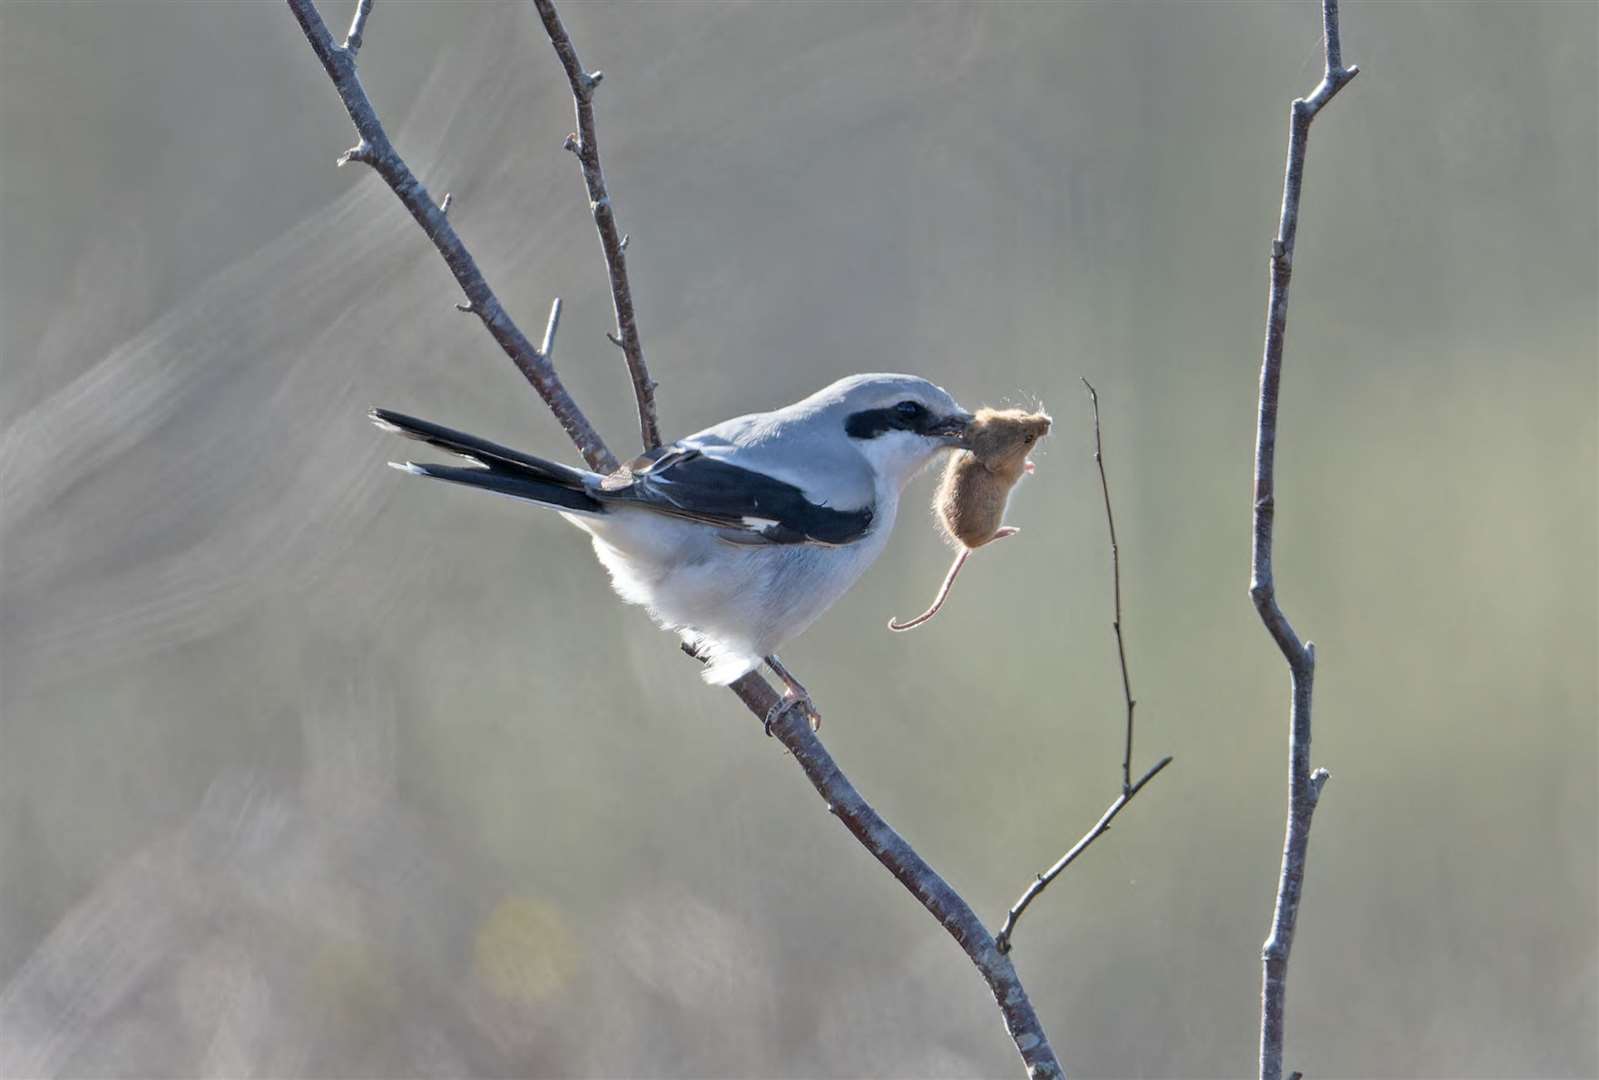 Photograph of a rare Great Grey Shrike, or 'butcher bird', captured at Hothfield Heath, Ashford, on April 11. Picture: SWNS / Chris Newman